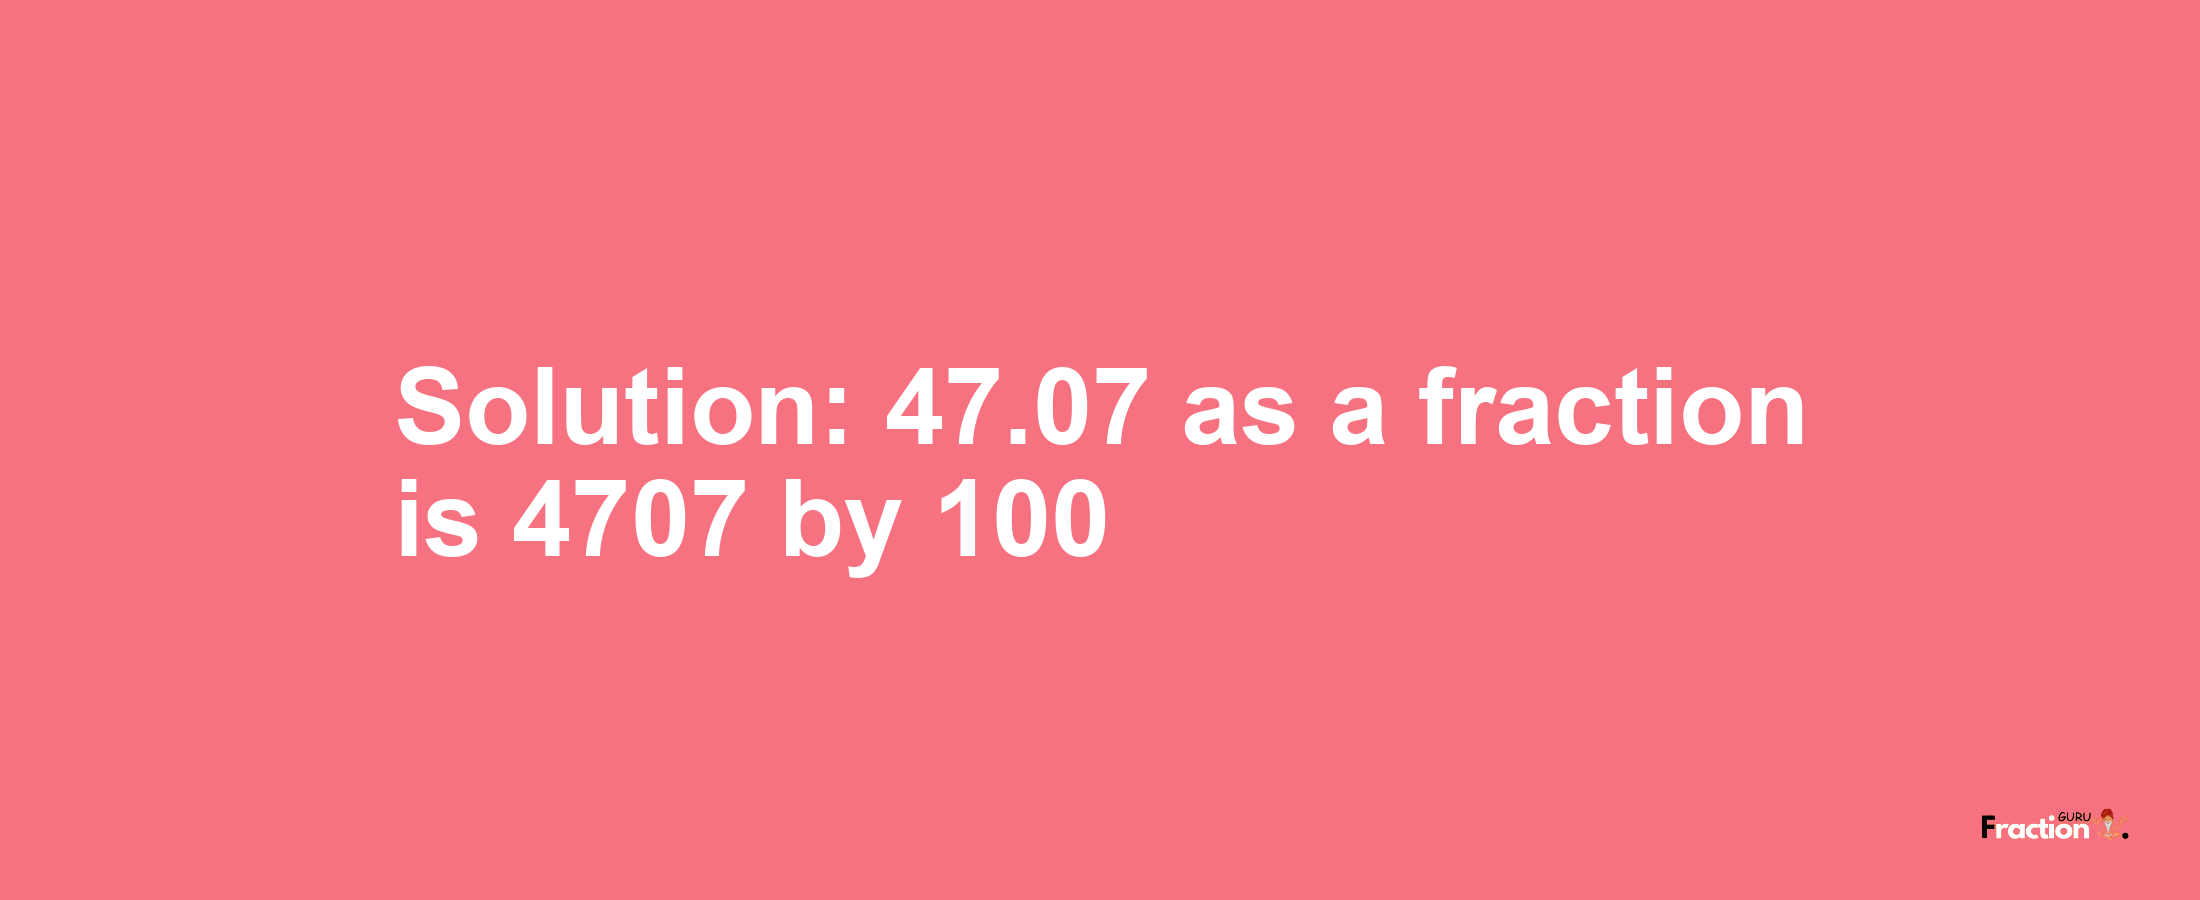 Solution:47.07 as a fraction is 4707/100